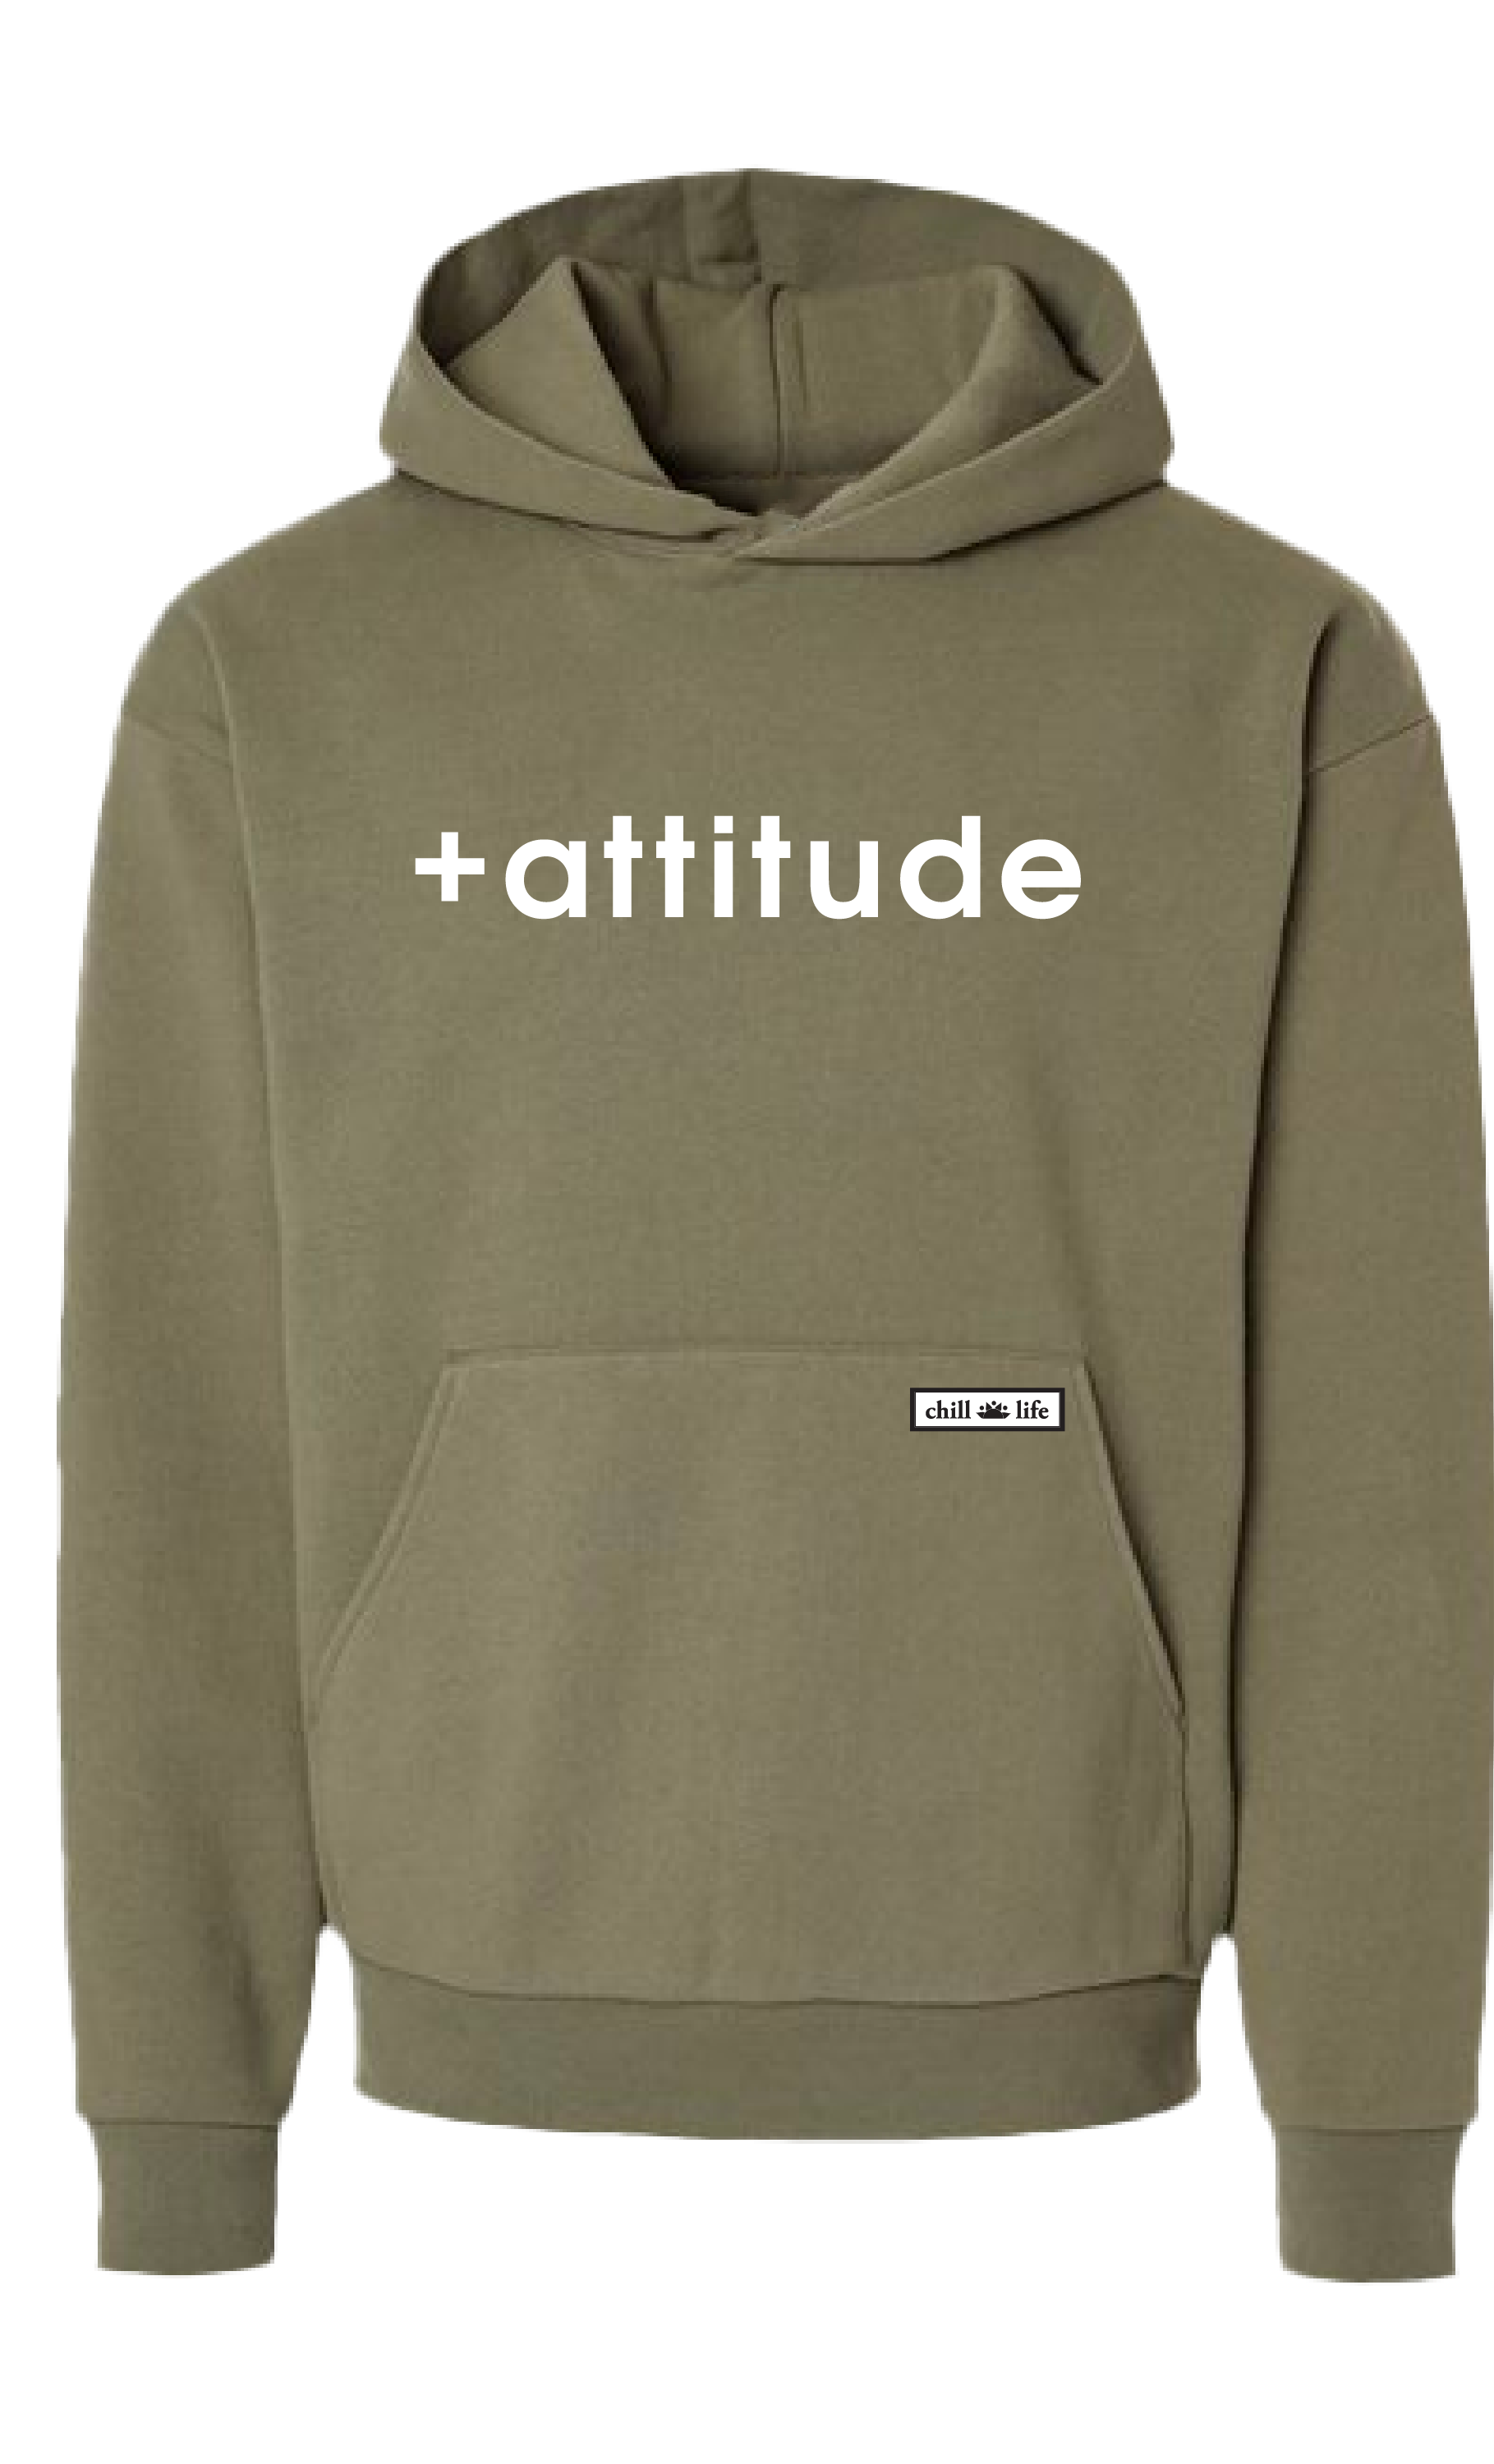 +attitude Hoodie - Olive chill life style